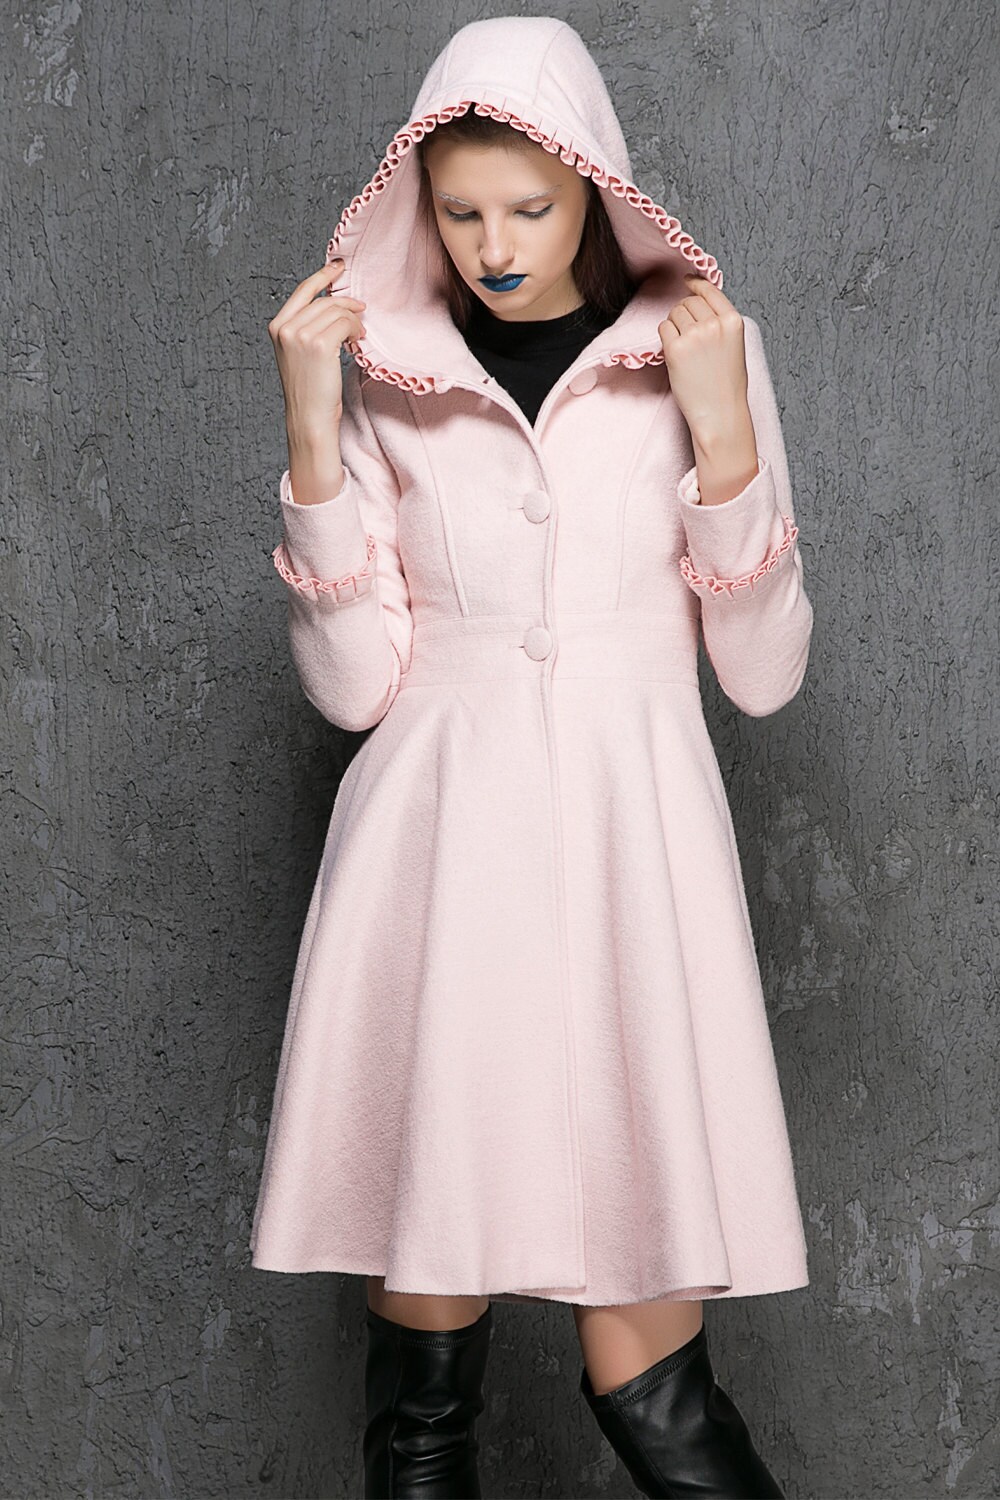 Hooded Swing Coat in Pink, Hooded Wool Coat, Womens Coats, Winter Coat,  Ladies Clothing, Mod Clothing, Autumn and Winter Coat Outfit 1352 